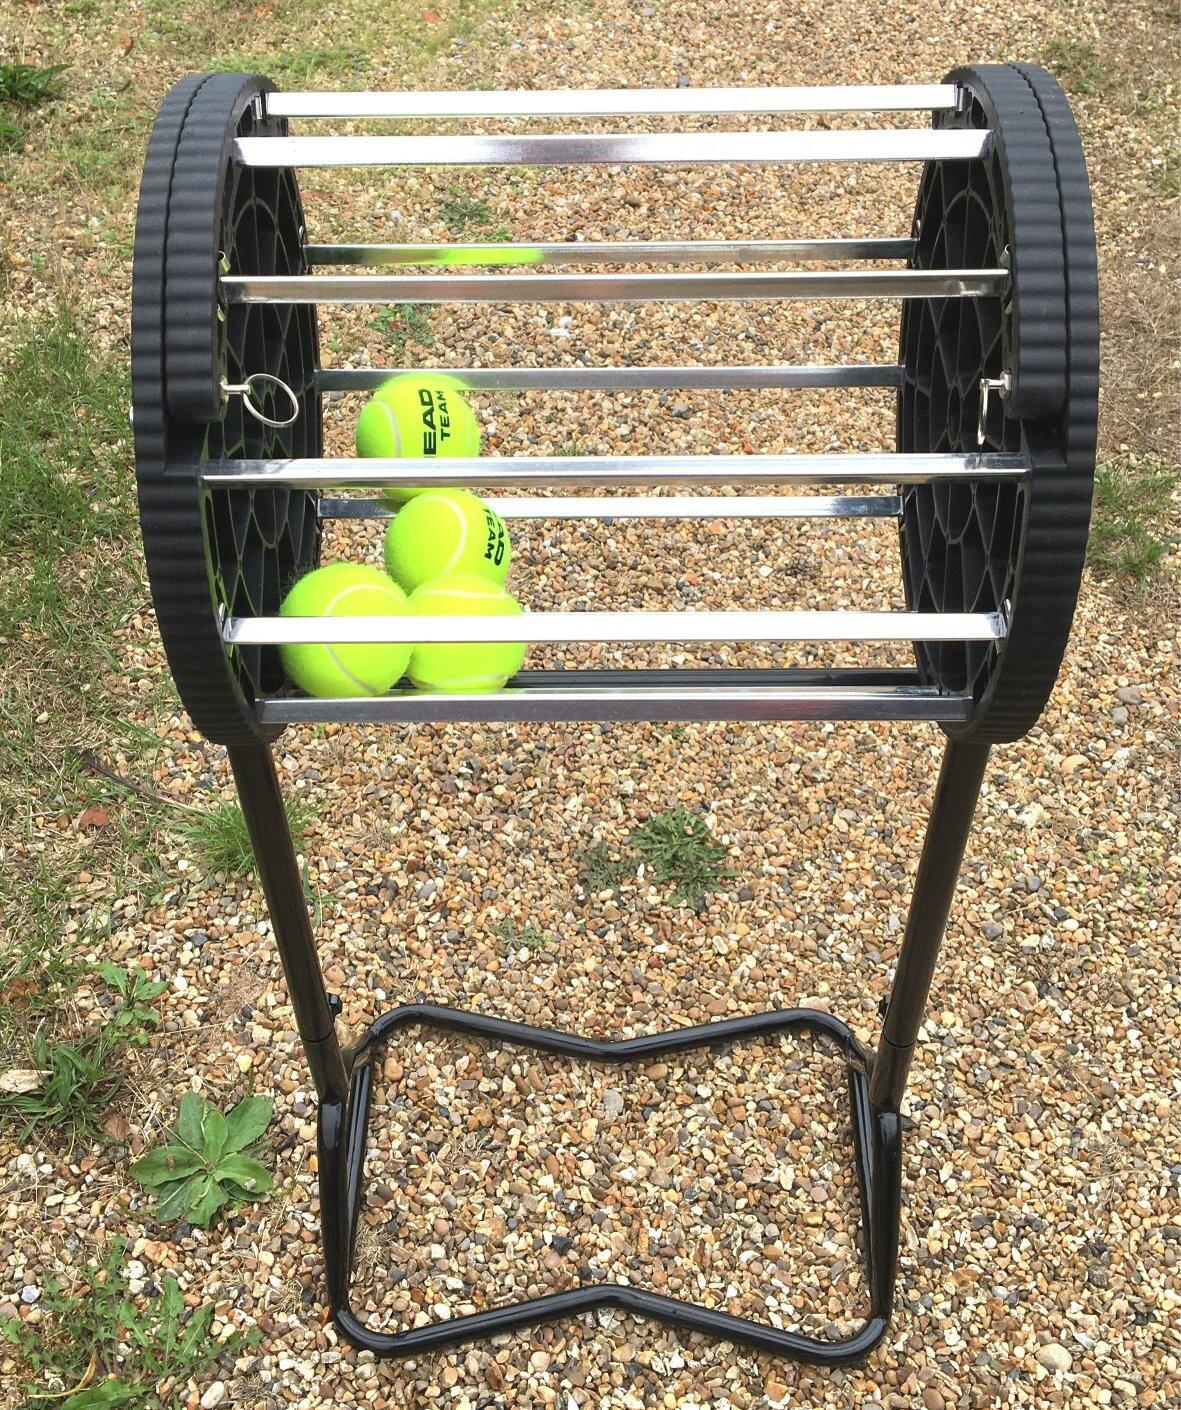 Tennis ball machine accessories, ball pick up baskets and mowers, batteries and chargers, remotes